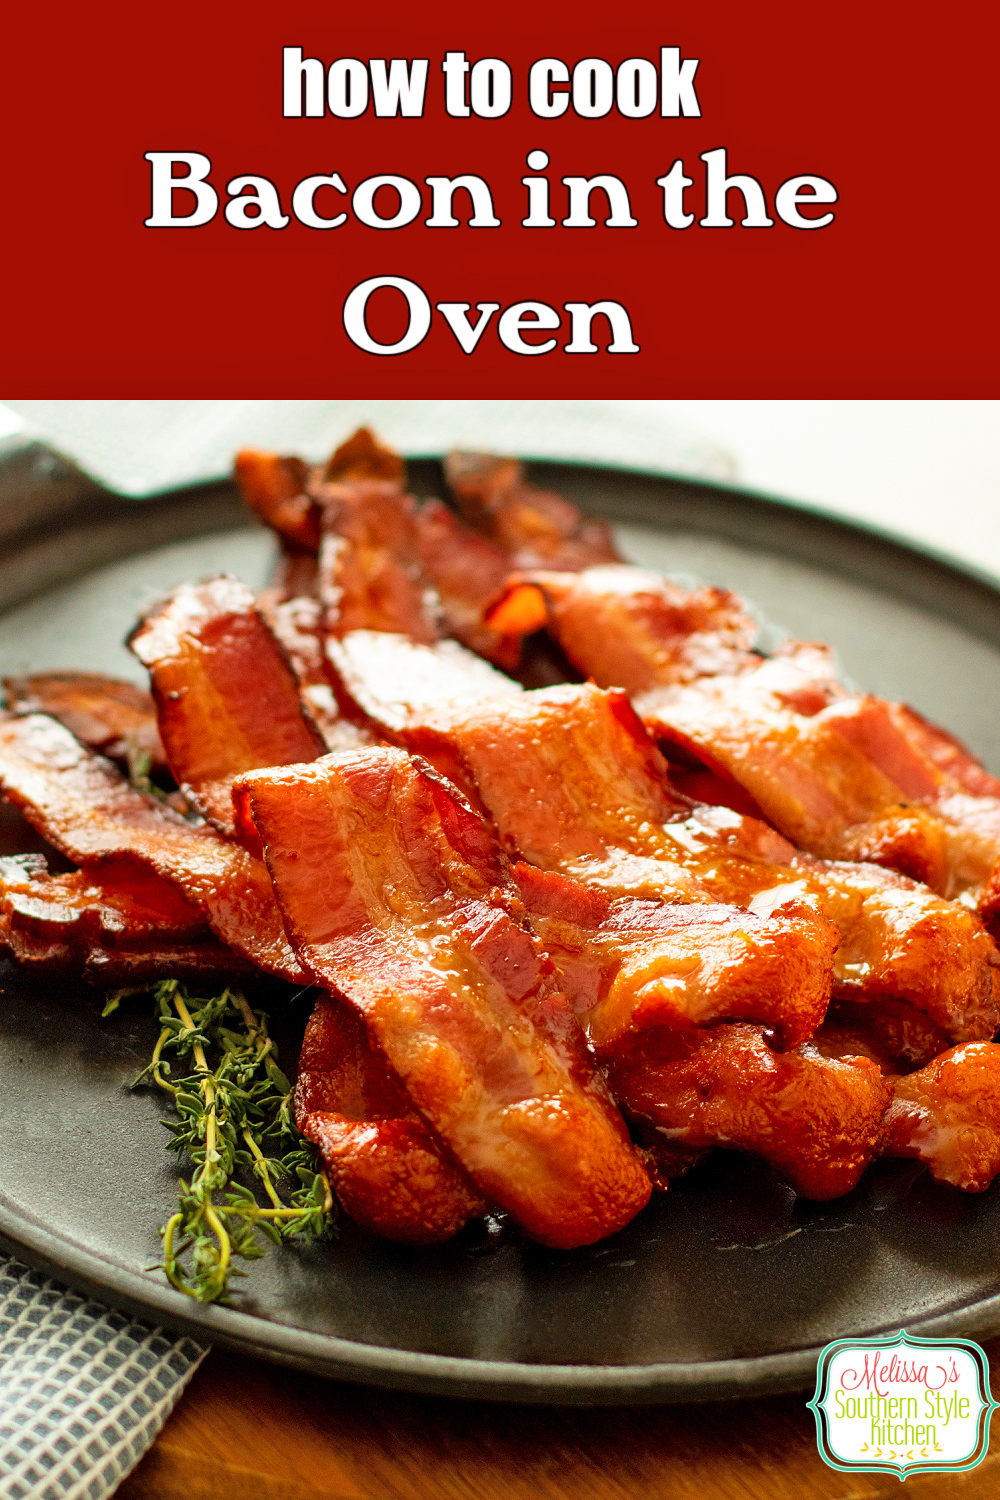 This simple technique showing you How to Cook Bacon in the Oven is one that you'll return to over and over again. #bacon #bakedbacon #howtocookbaconintheoven #ovenfriedbacon #easybaconrecipes #baconrecipes